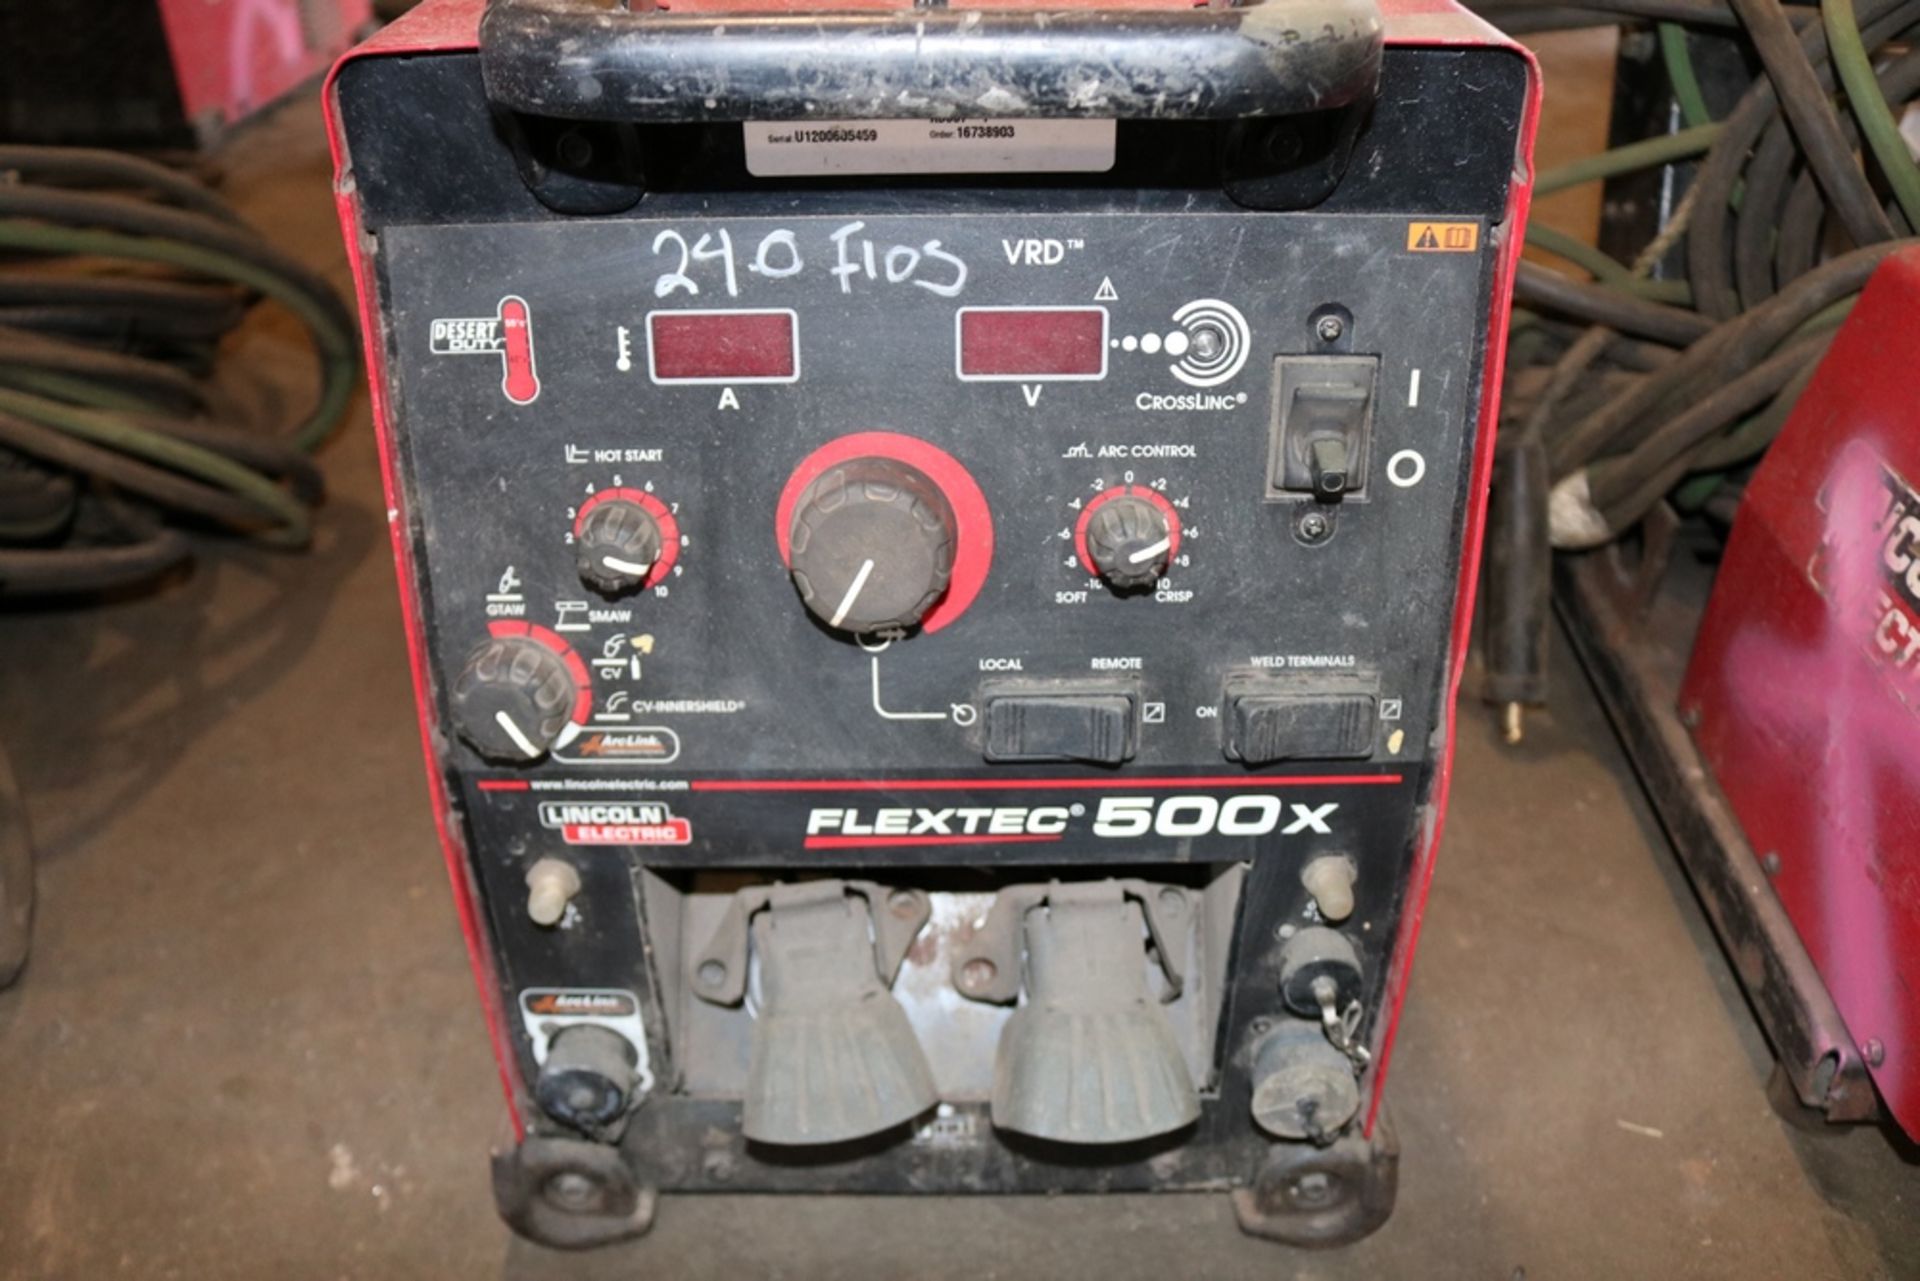 2020 Lincoln Electric Flextec 500X Welder with LF-72 Feeder - Image 6 of 8